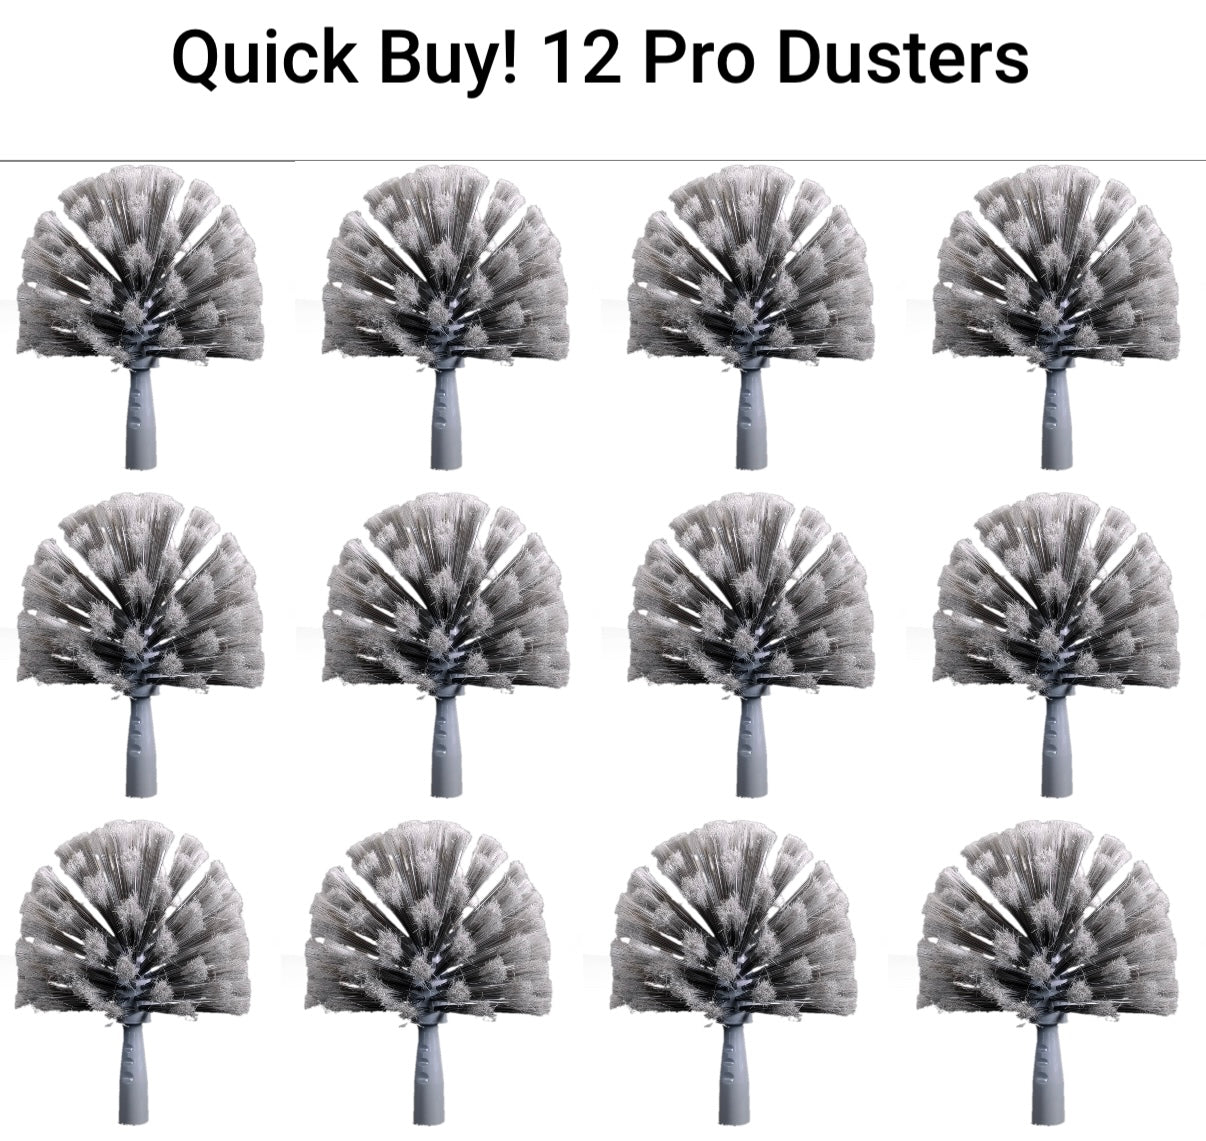 Case of 12 Pro Dusters